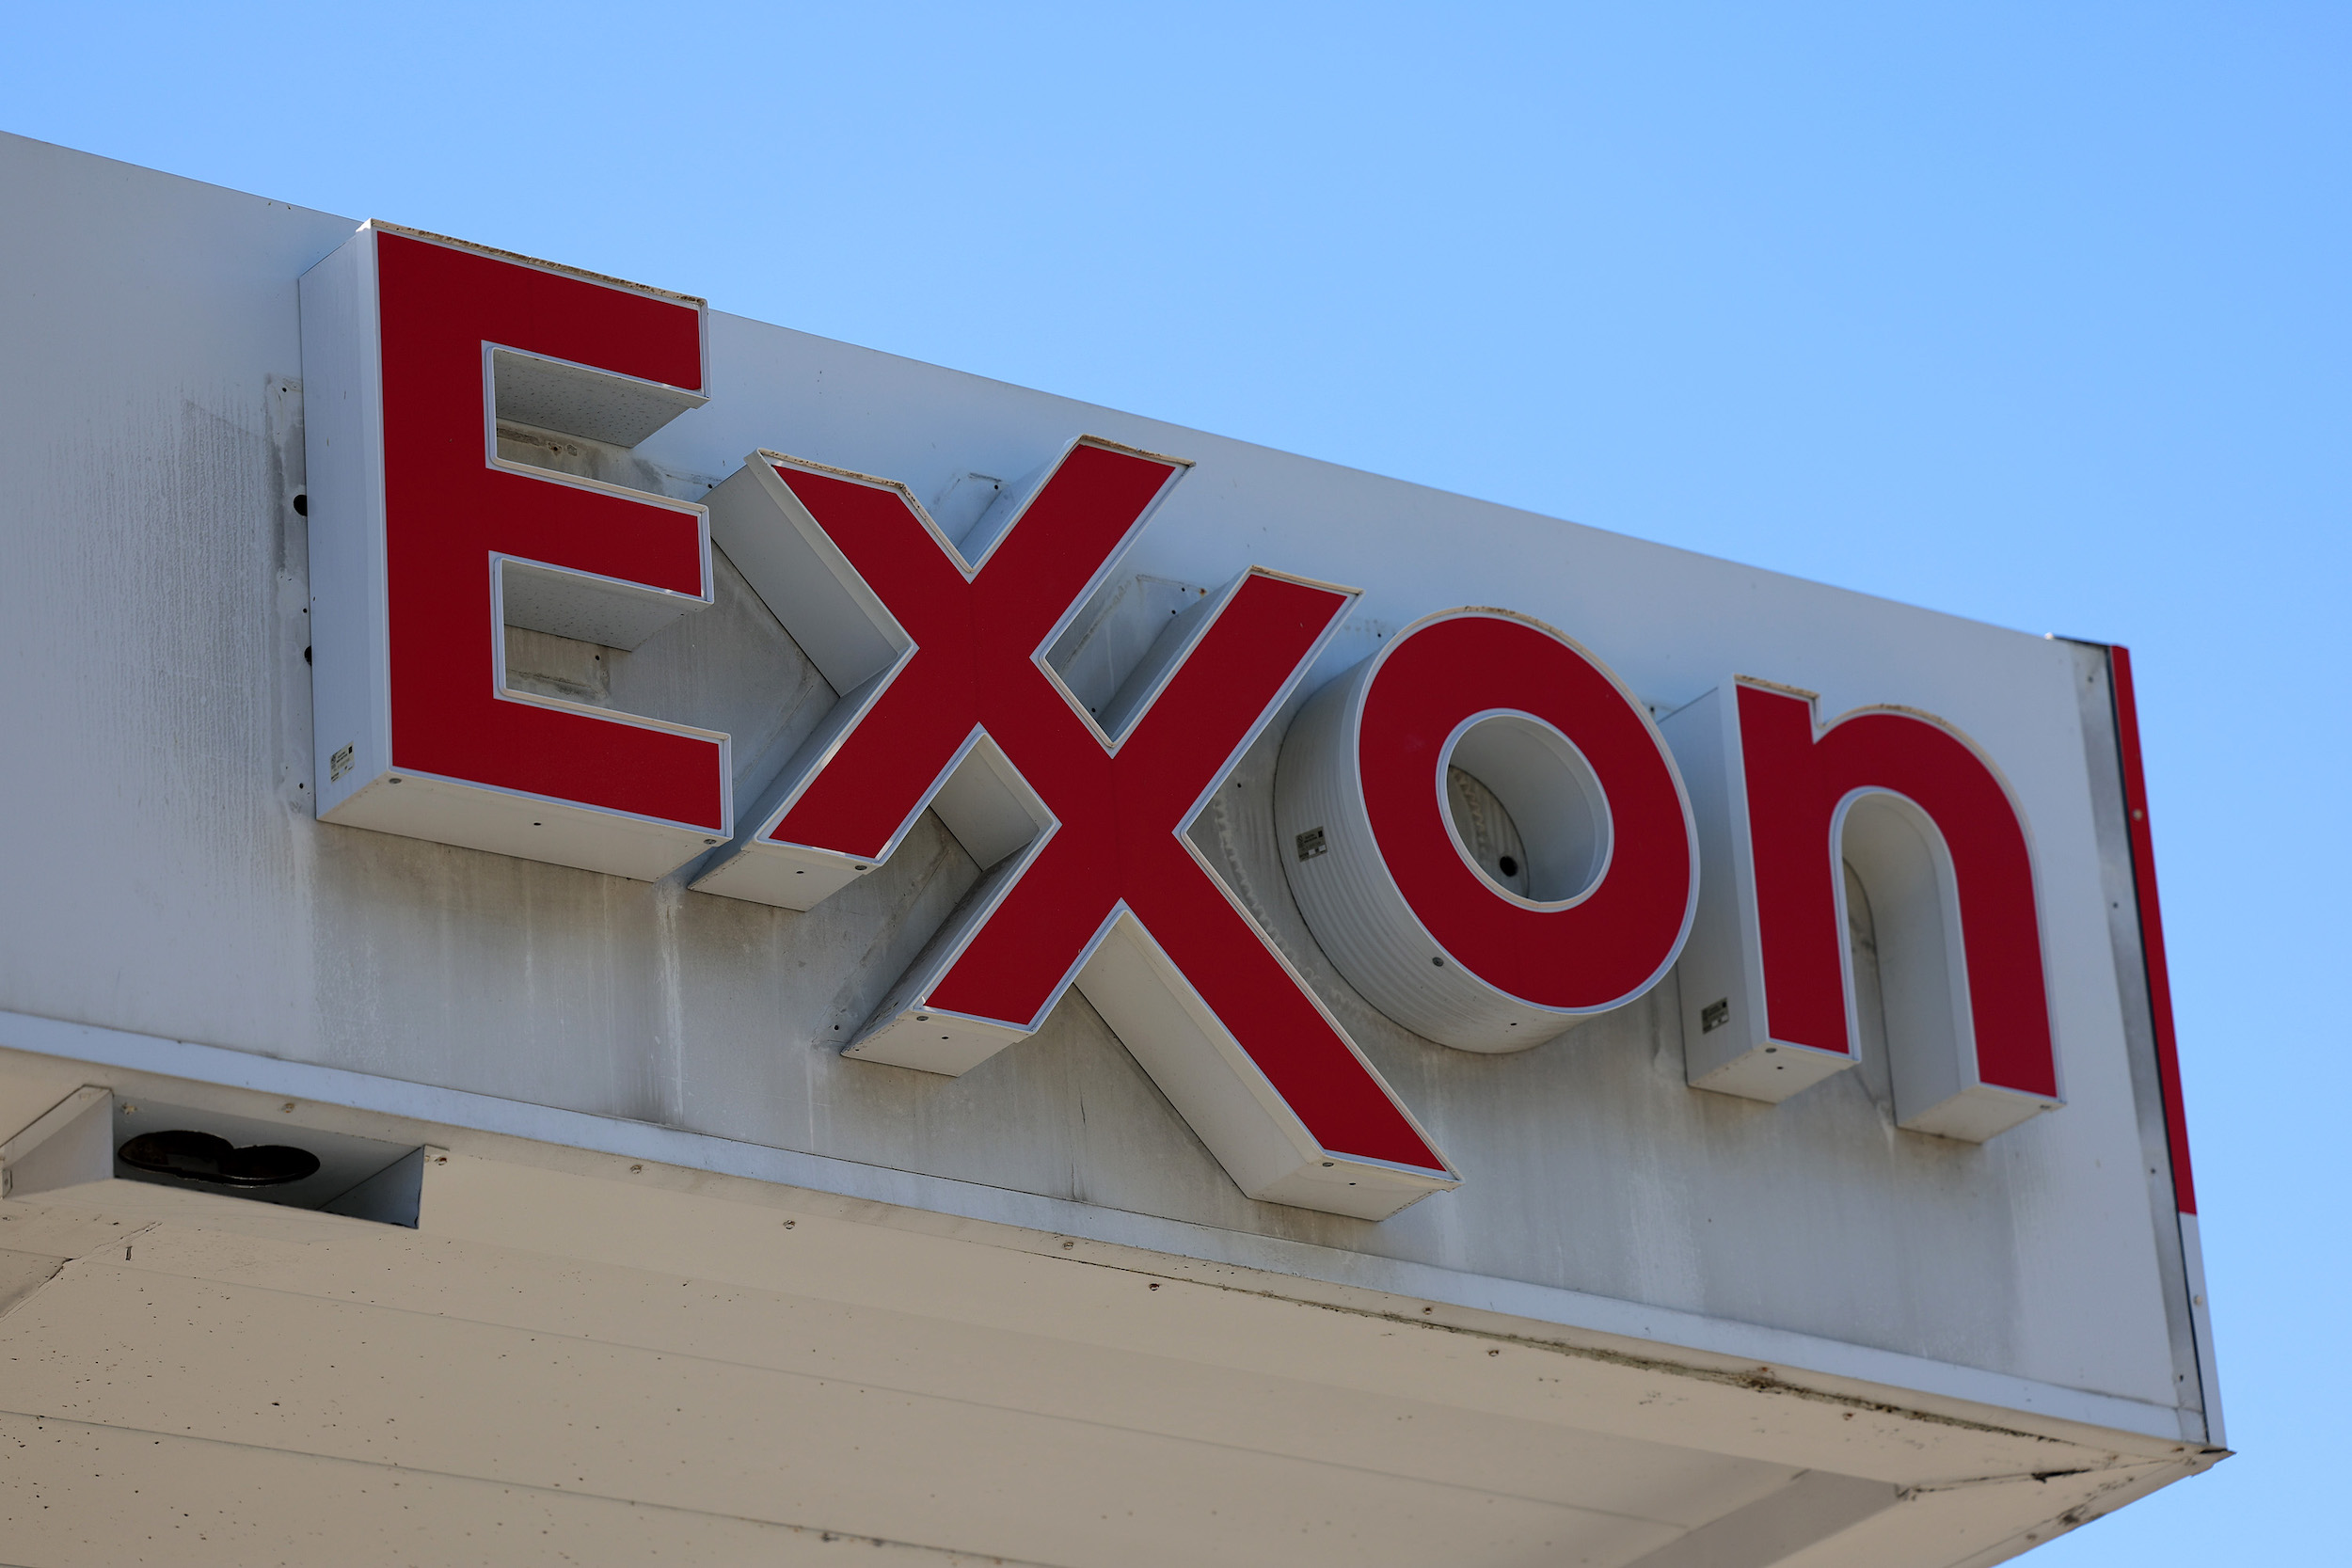 A close-up of a red Exxon sign at a gas station in Florida.